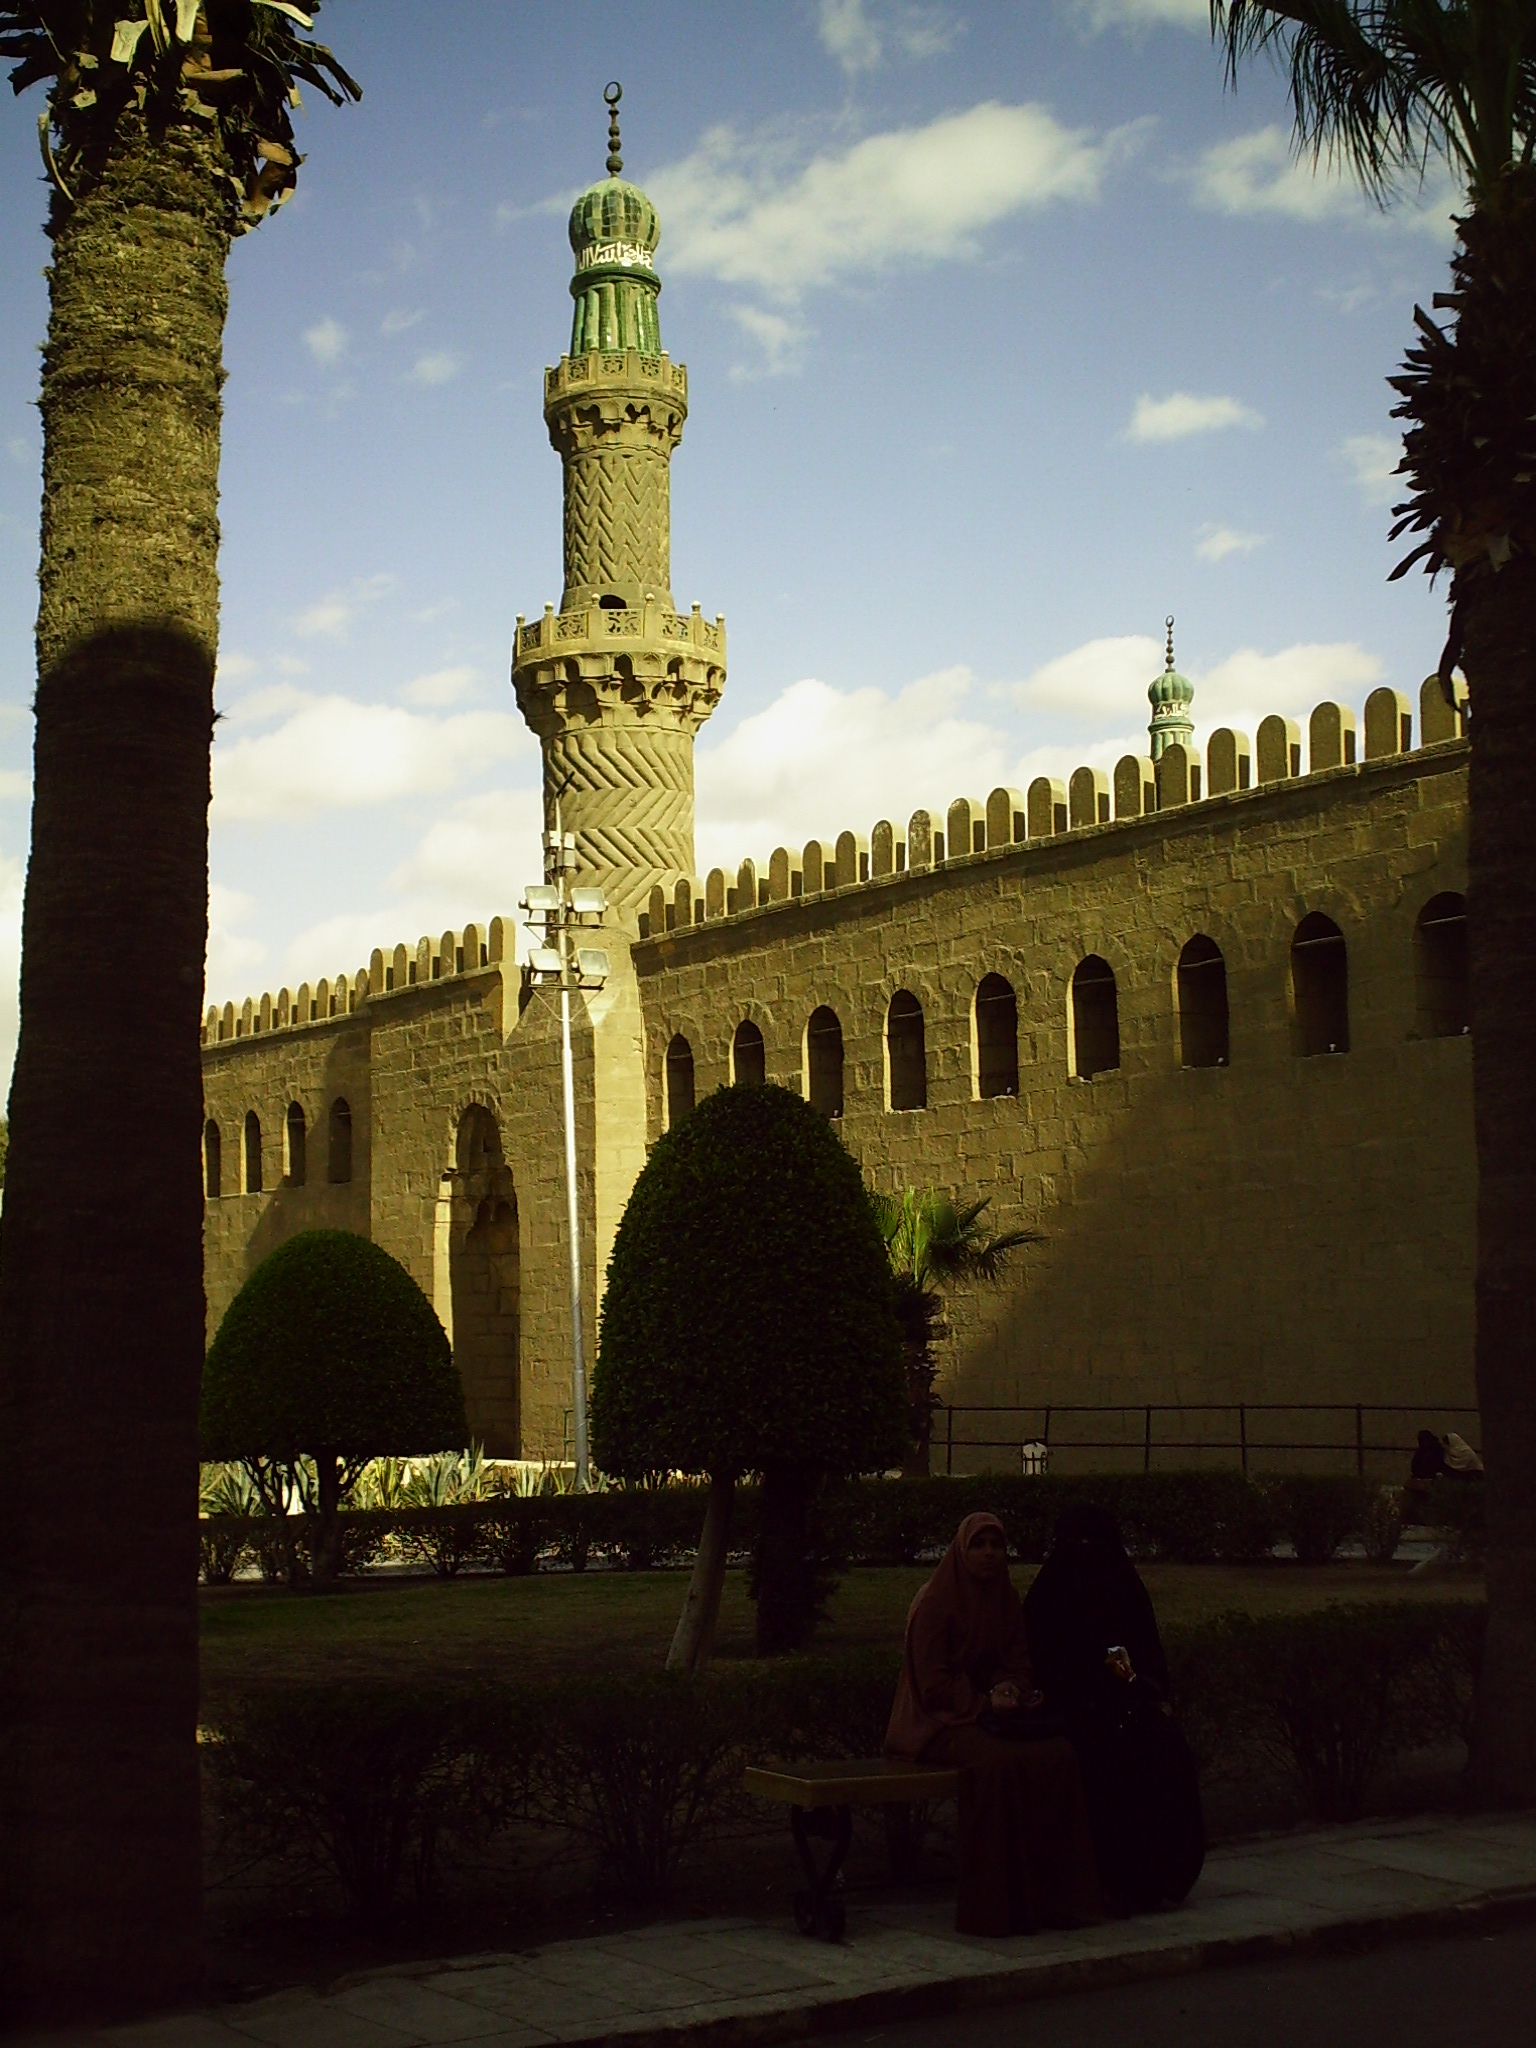  Minaret at the Mohammed Ali Mosque, Cairo 